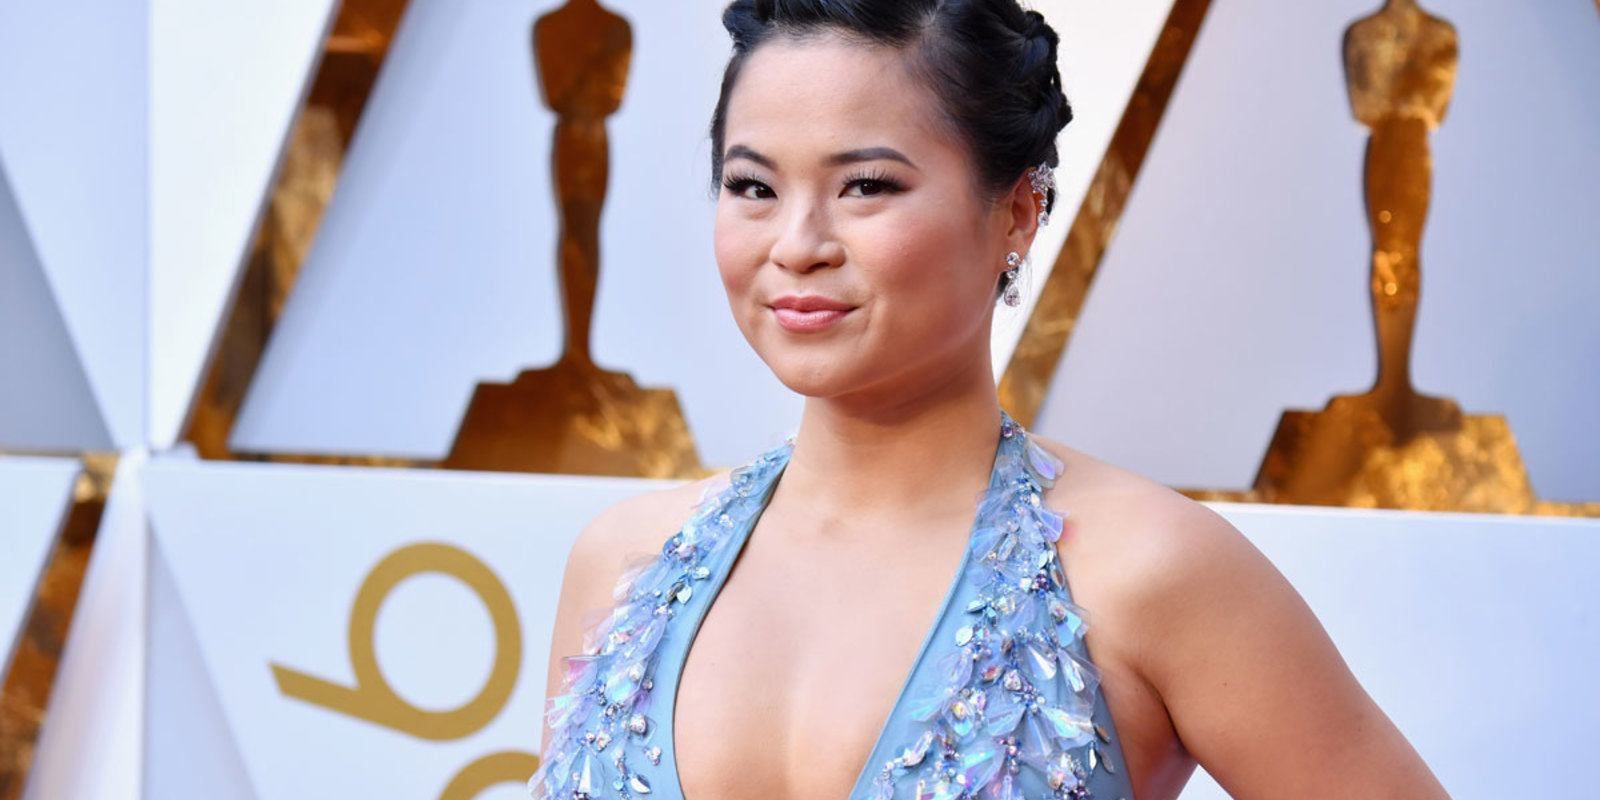 Kelly Marie Tran attends the 90th Annual Academy Awards at Hollywood & Highland Center on March 4, 2018 in Hollywood, California. (Photo by Jeff Kravitz/FilmMagic)